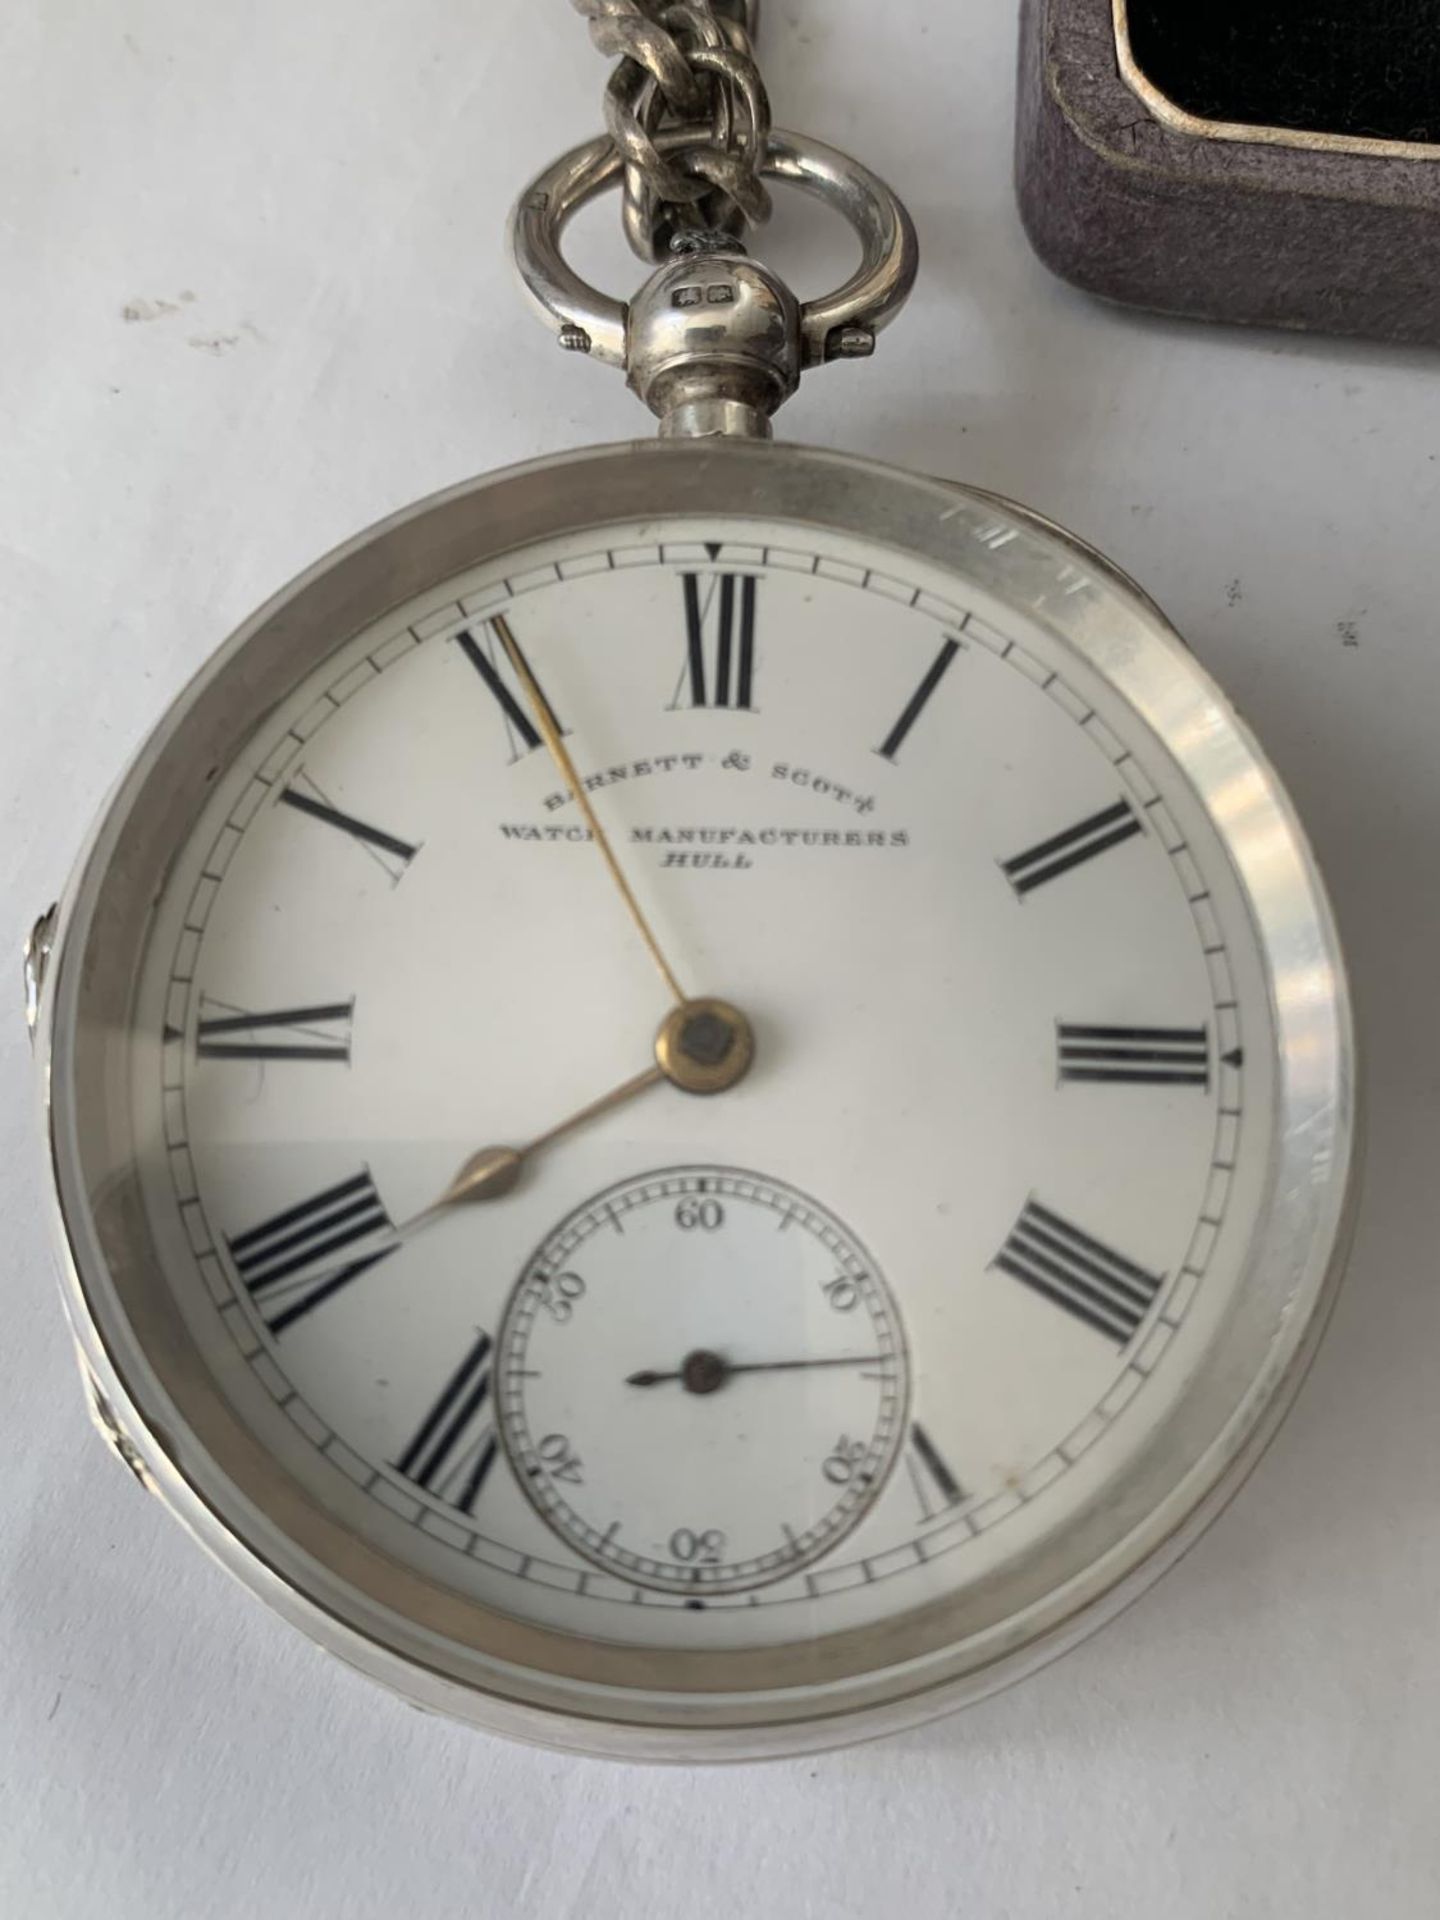 A HALLMARKED LONDON SILVER BARNET AND SCOTT HULLPOCKET WATCH WITH A HEAVY MARKED SILVER CHAIN IN A - Image 2 of 4